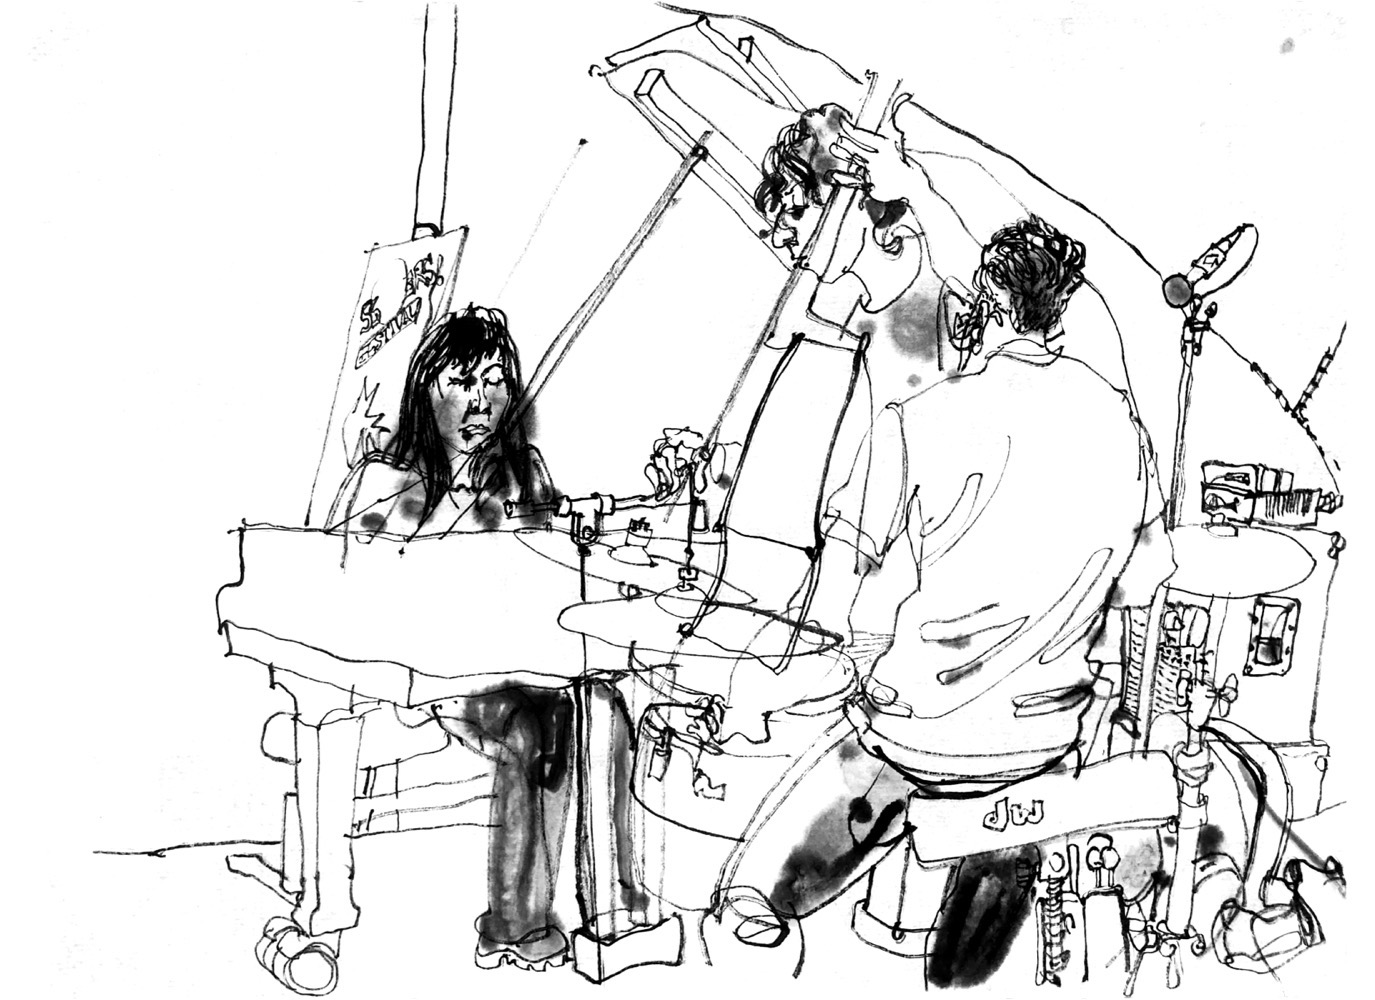 Ink drawing of three musicians.